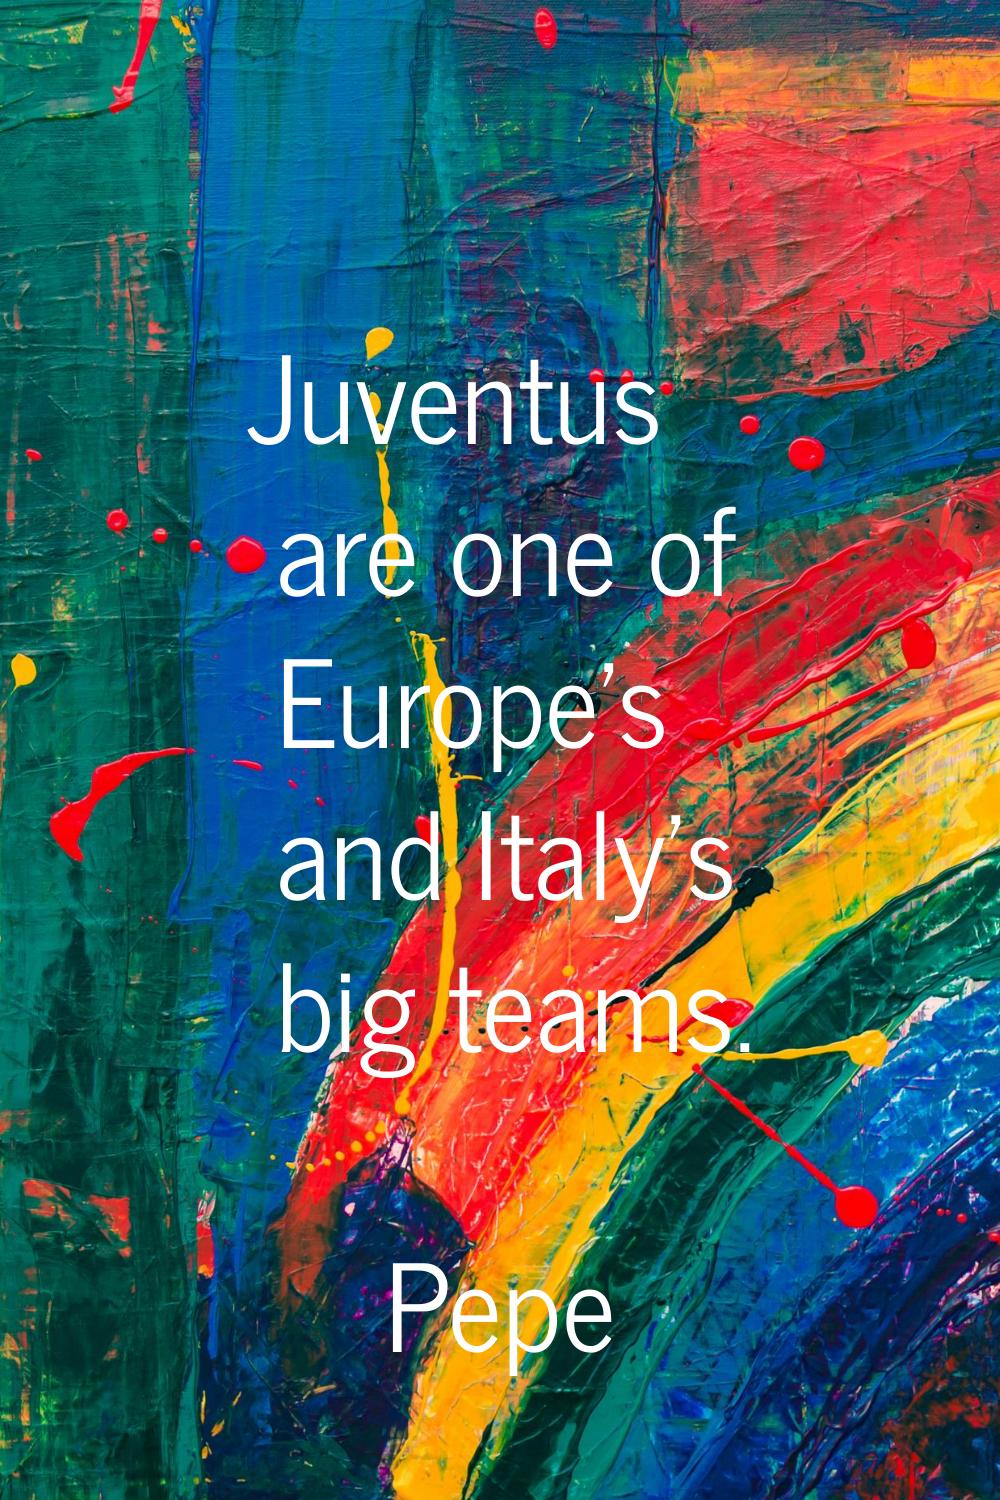 Juventus are one of Europe's and Italy's big teams.